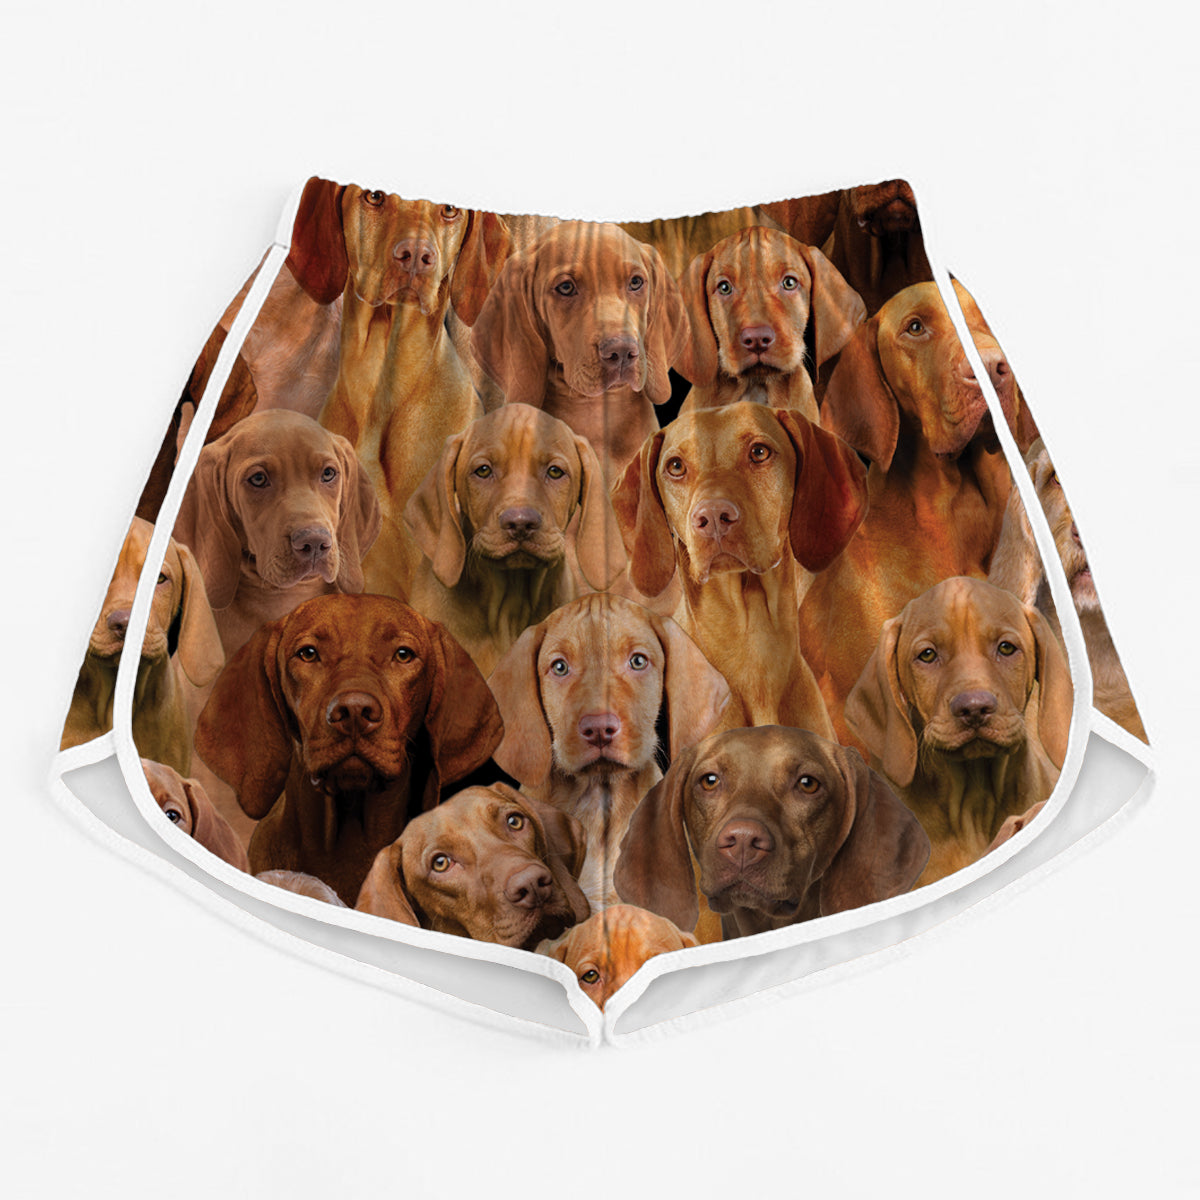 You Will Have A Bunch Of Vizslas - Women's Running Shorts V1